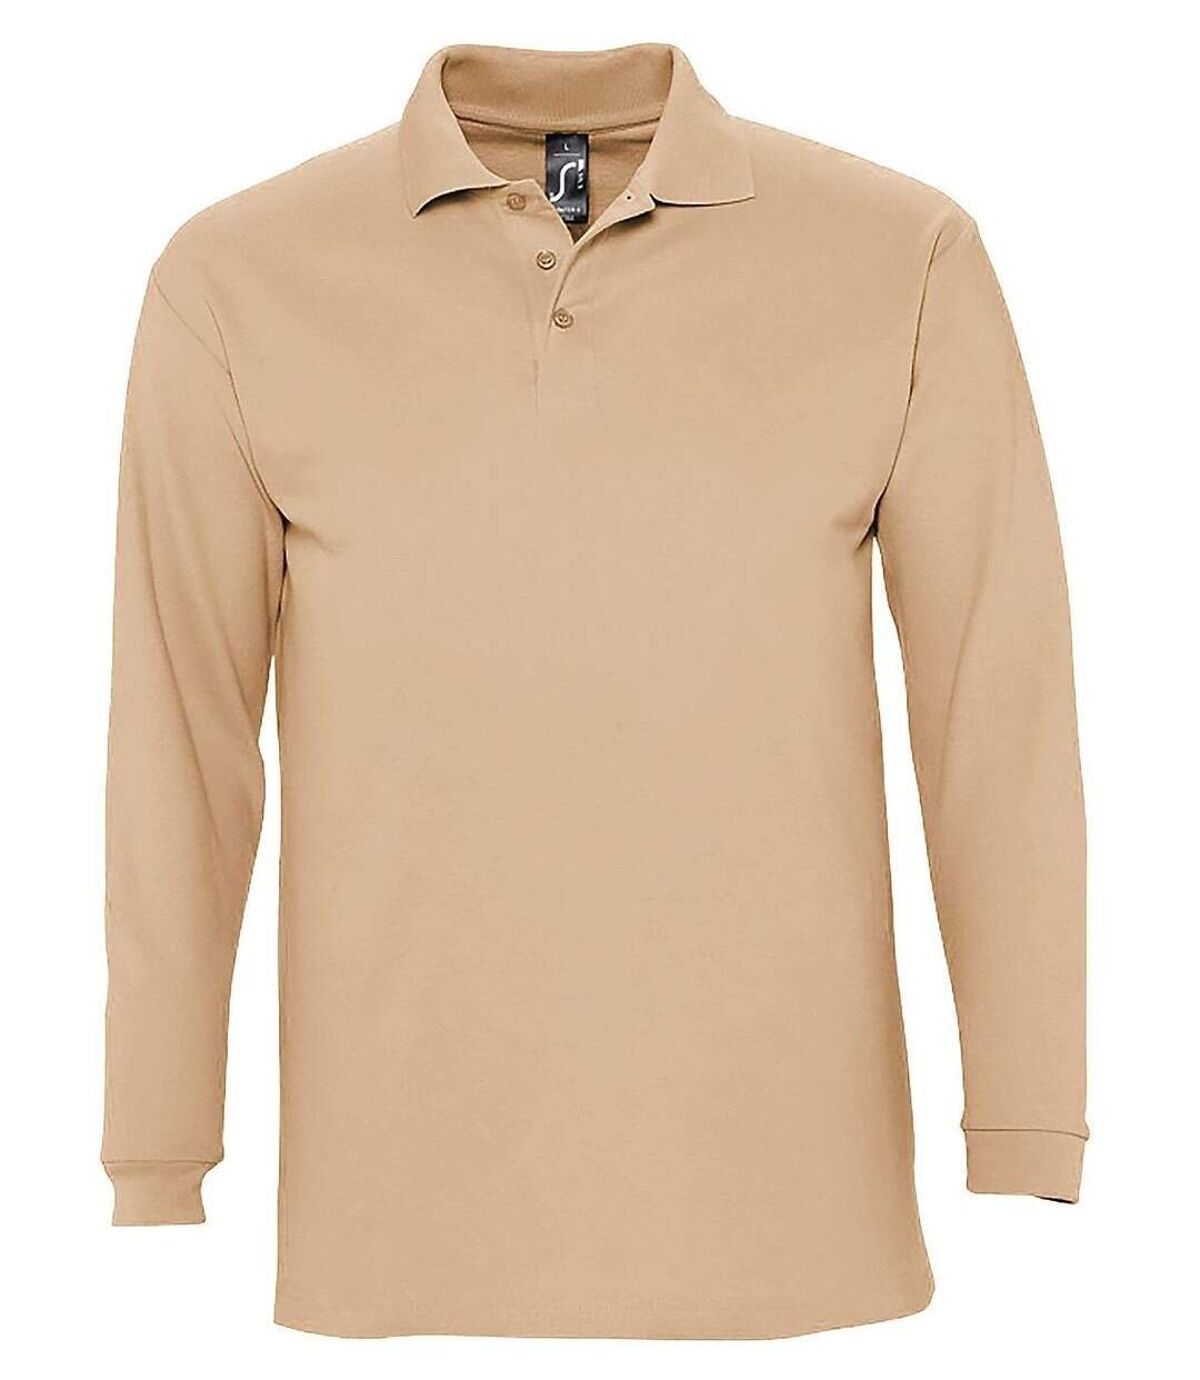 Polo manches longues - Homme - 11353 - beige sable